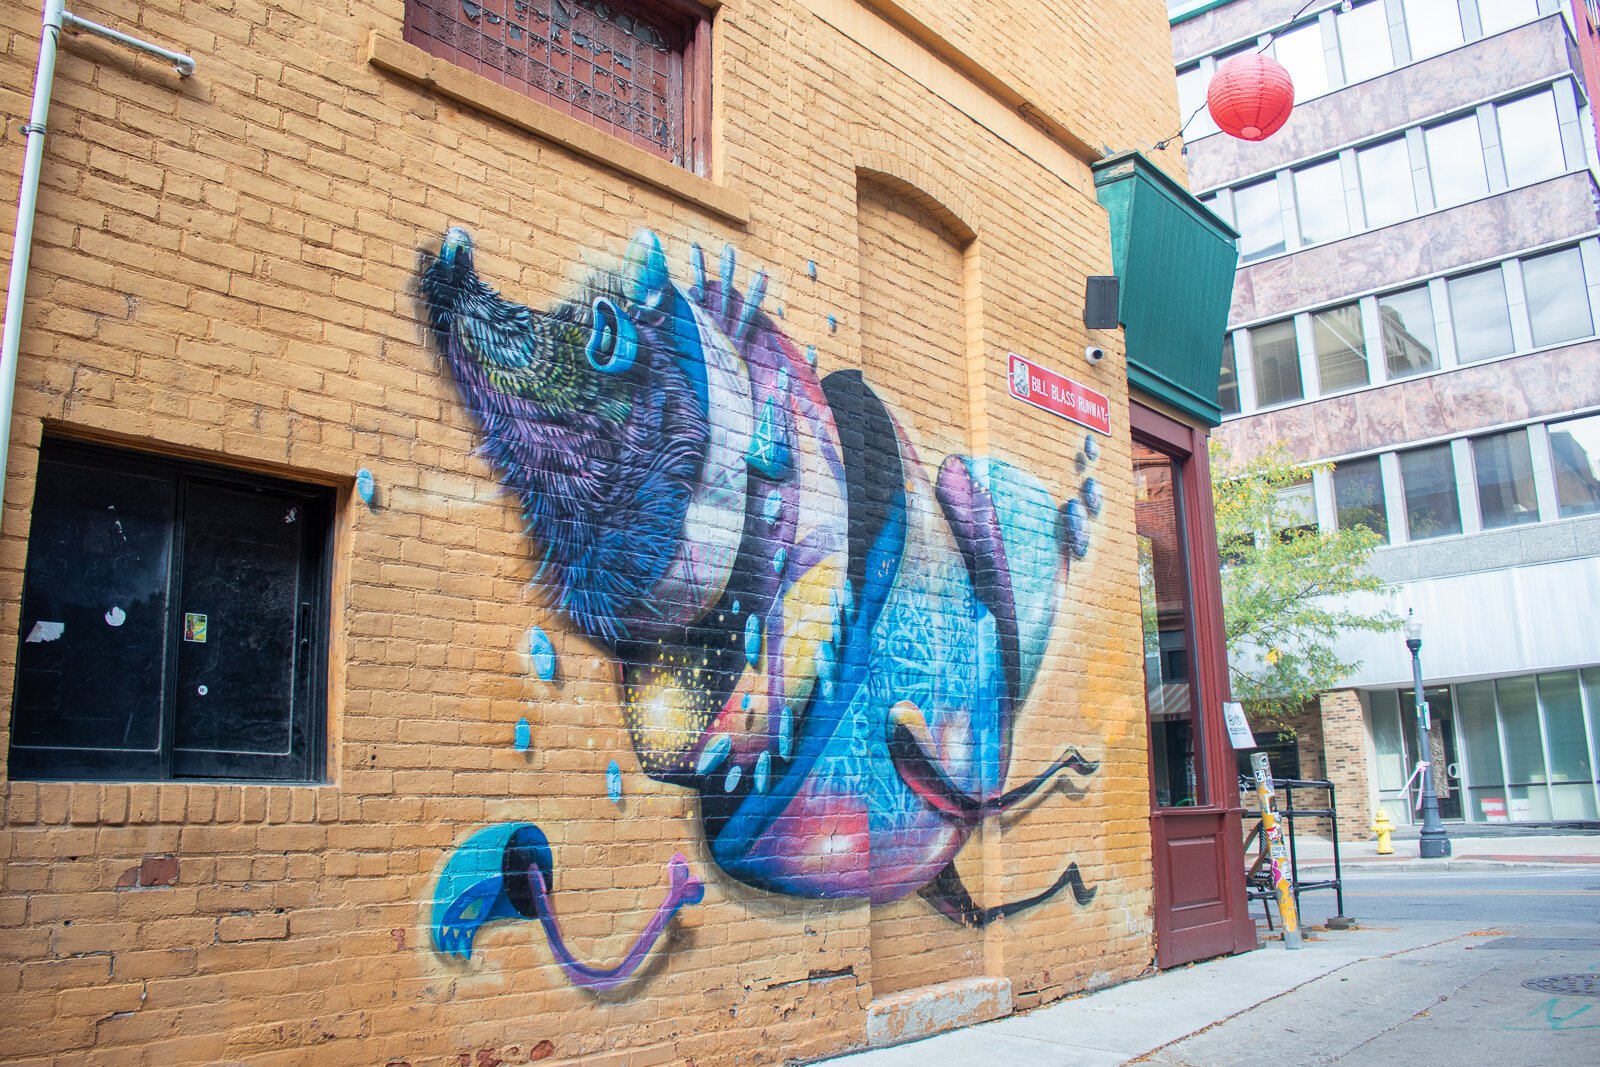 The Nosego mural was Downtown Fort Wayne’s first example of street art, and it was installed in 2014.